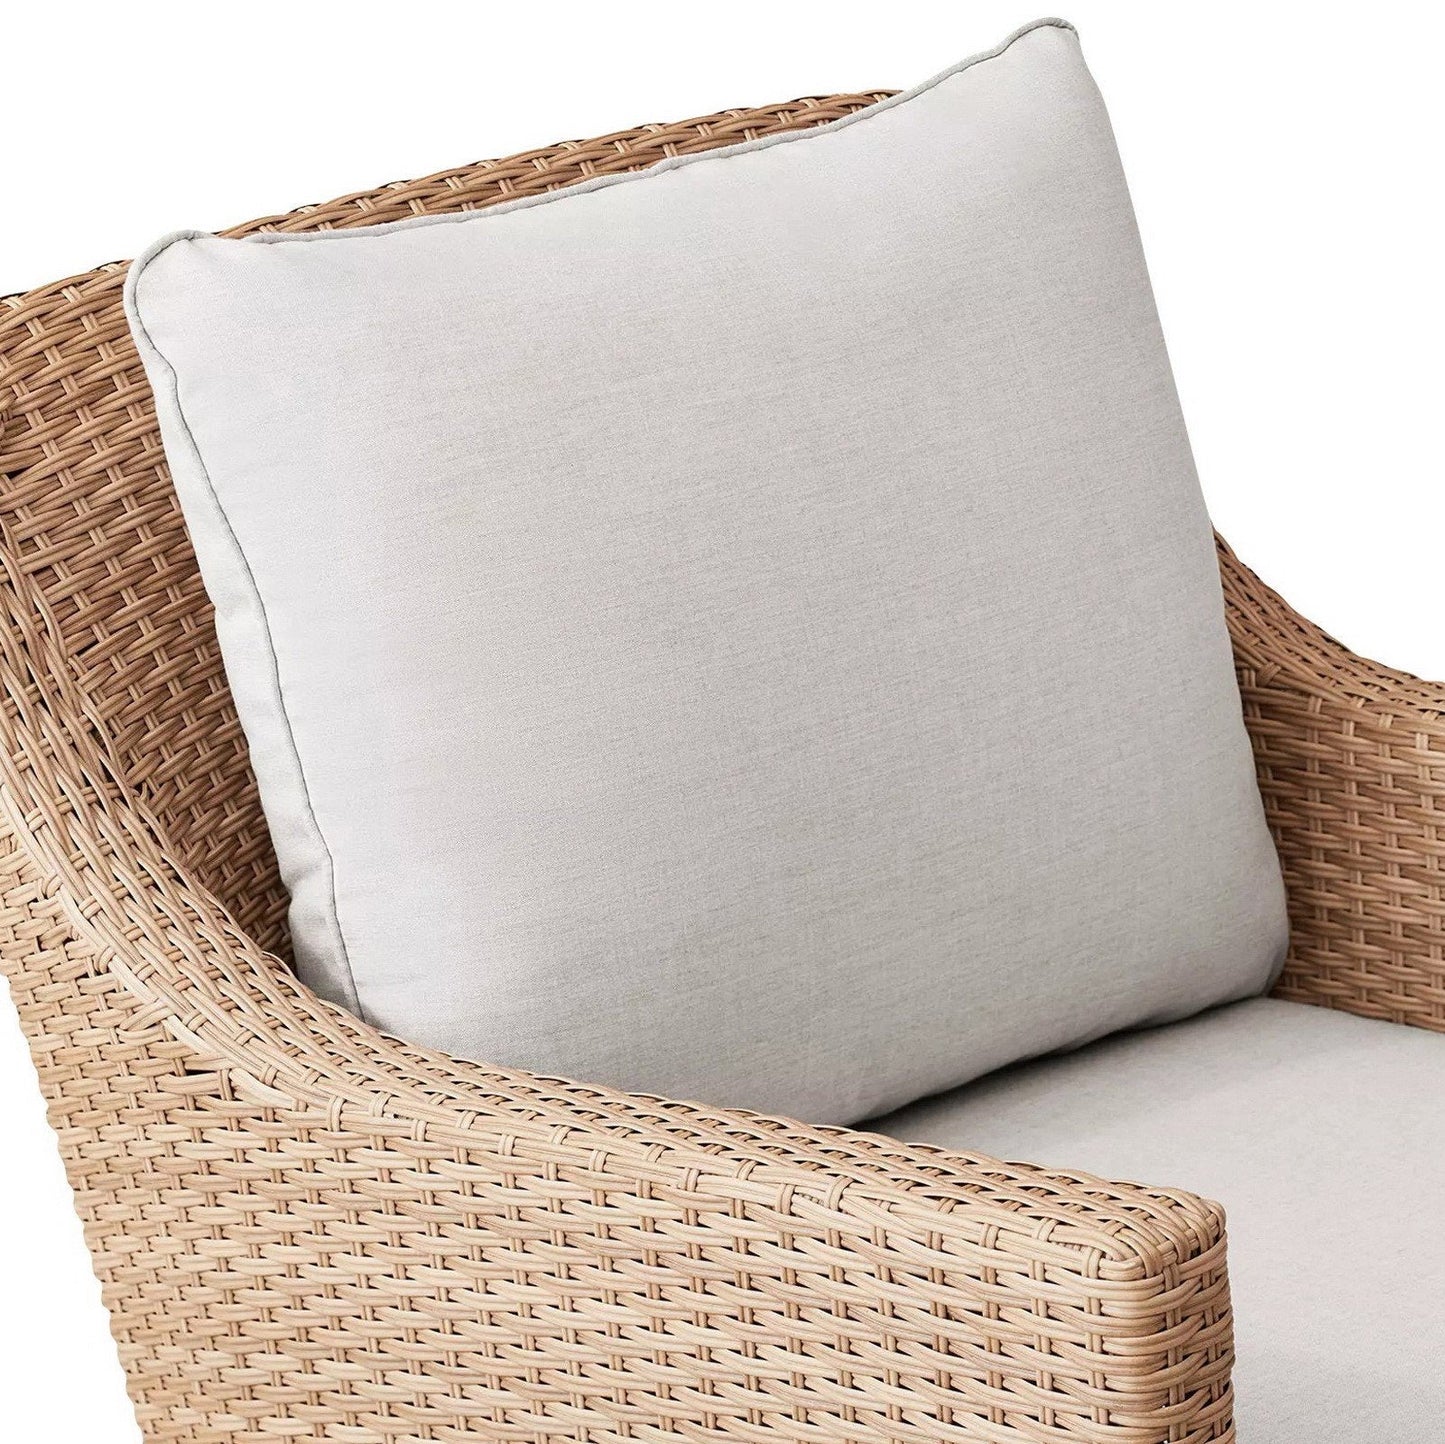 Camden 3-Piece Swivel Outdoor Wicker Patio Chat Set With Cushions